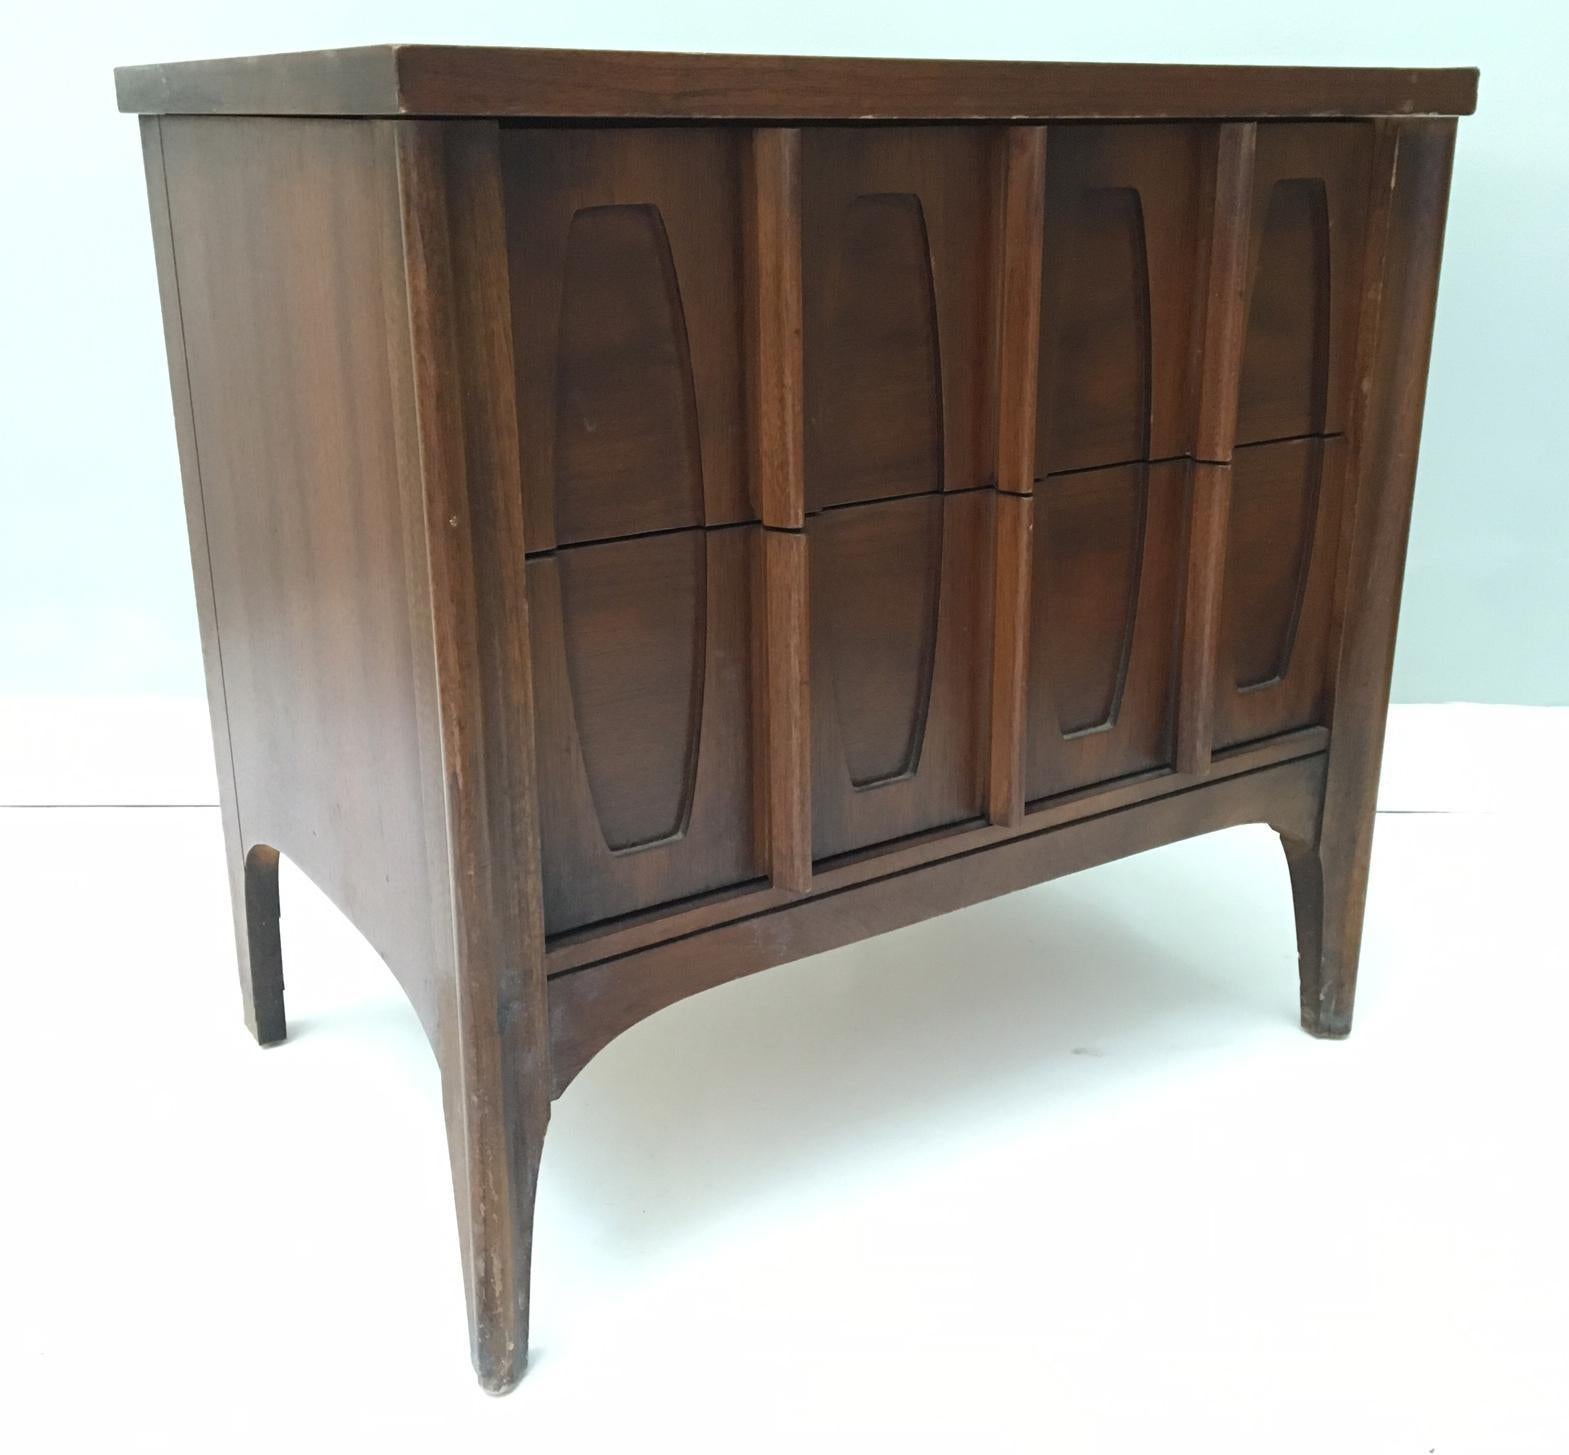 From the Town House collection by Kent Coffey, this nightstand adds the perfect midcentury style to a bedroom, or even as an end table in the living room. Excellent vintage condition with minor abrasions consistent with age.